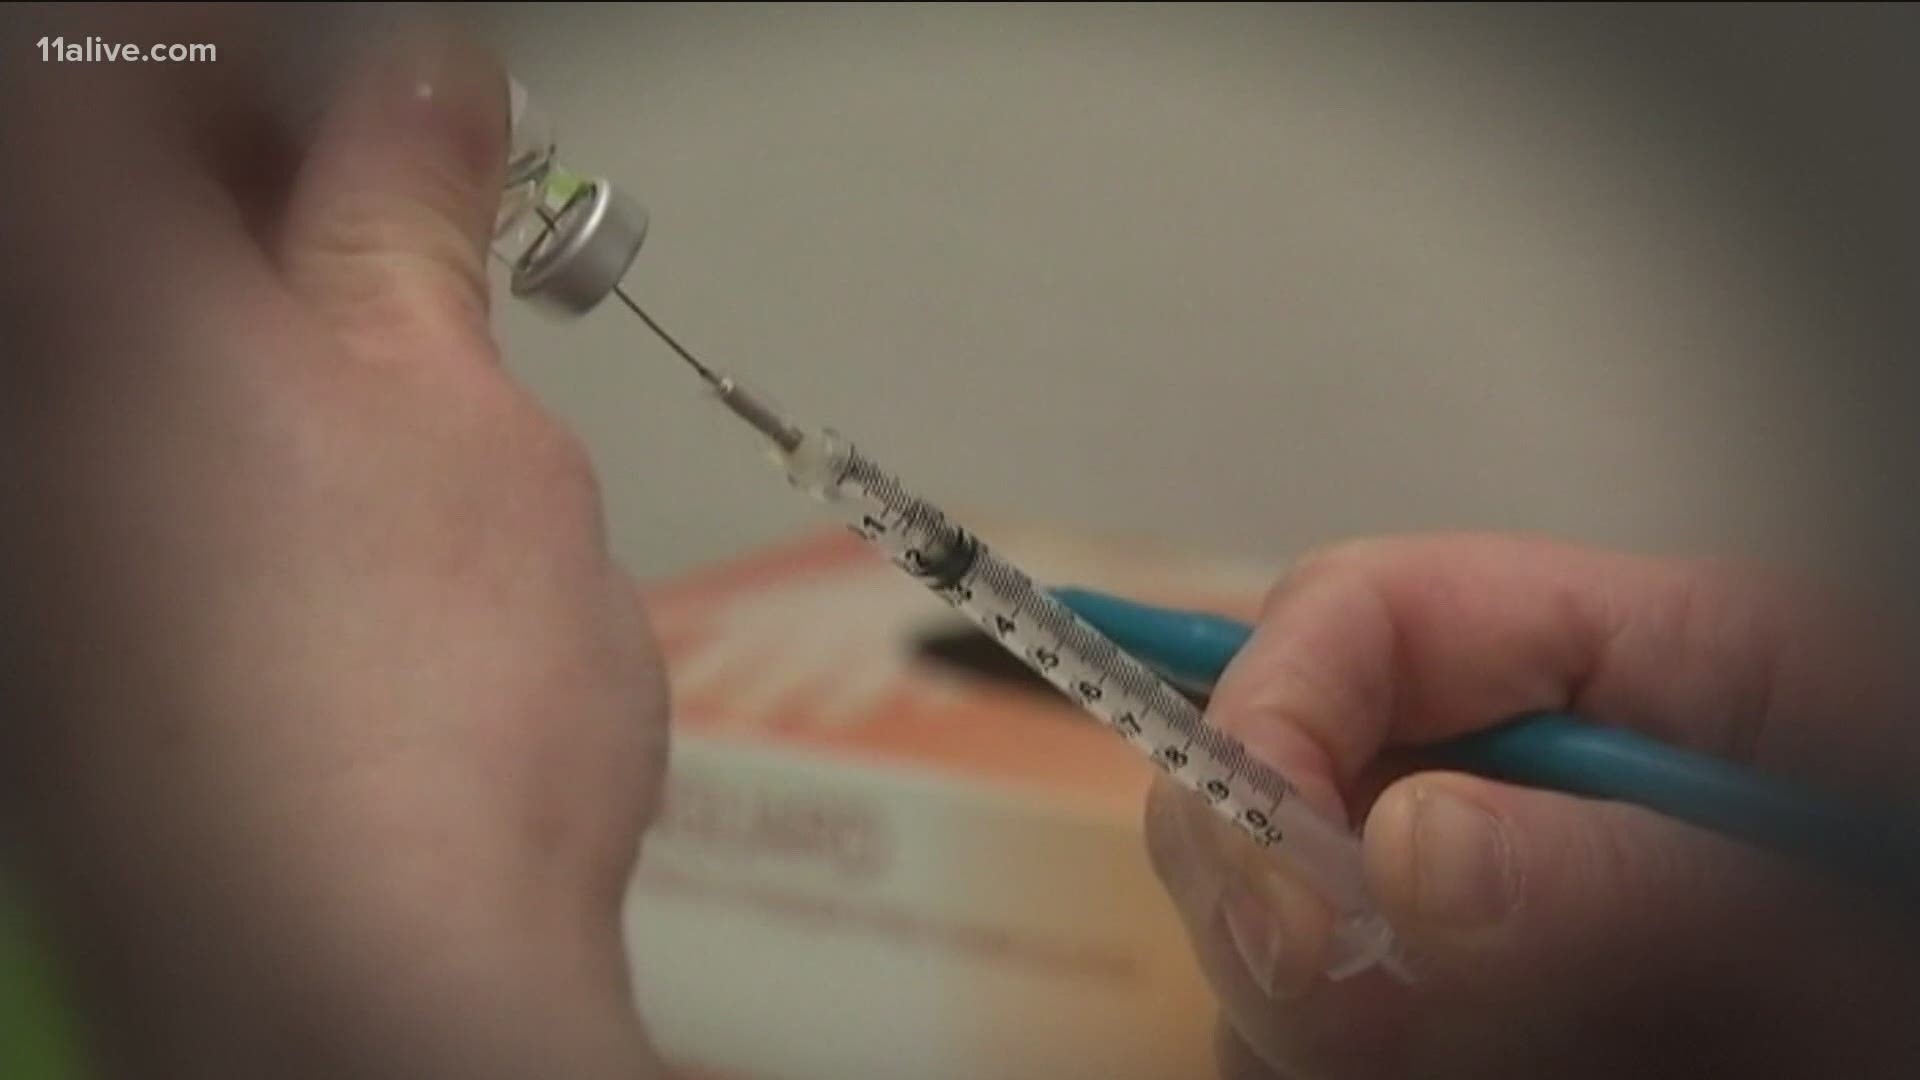 Less than half of all Americans got the flu shot last year.